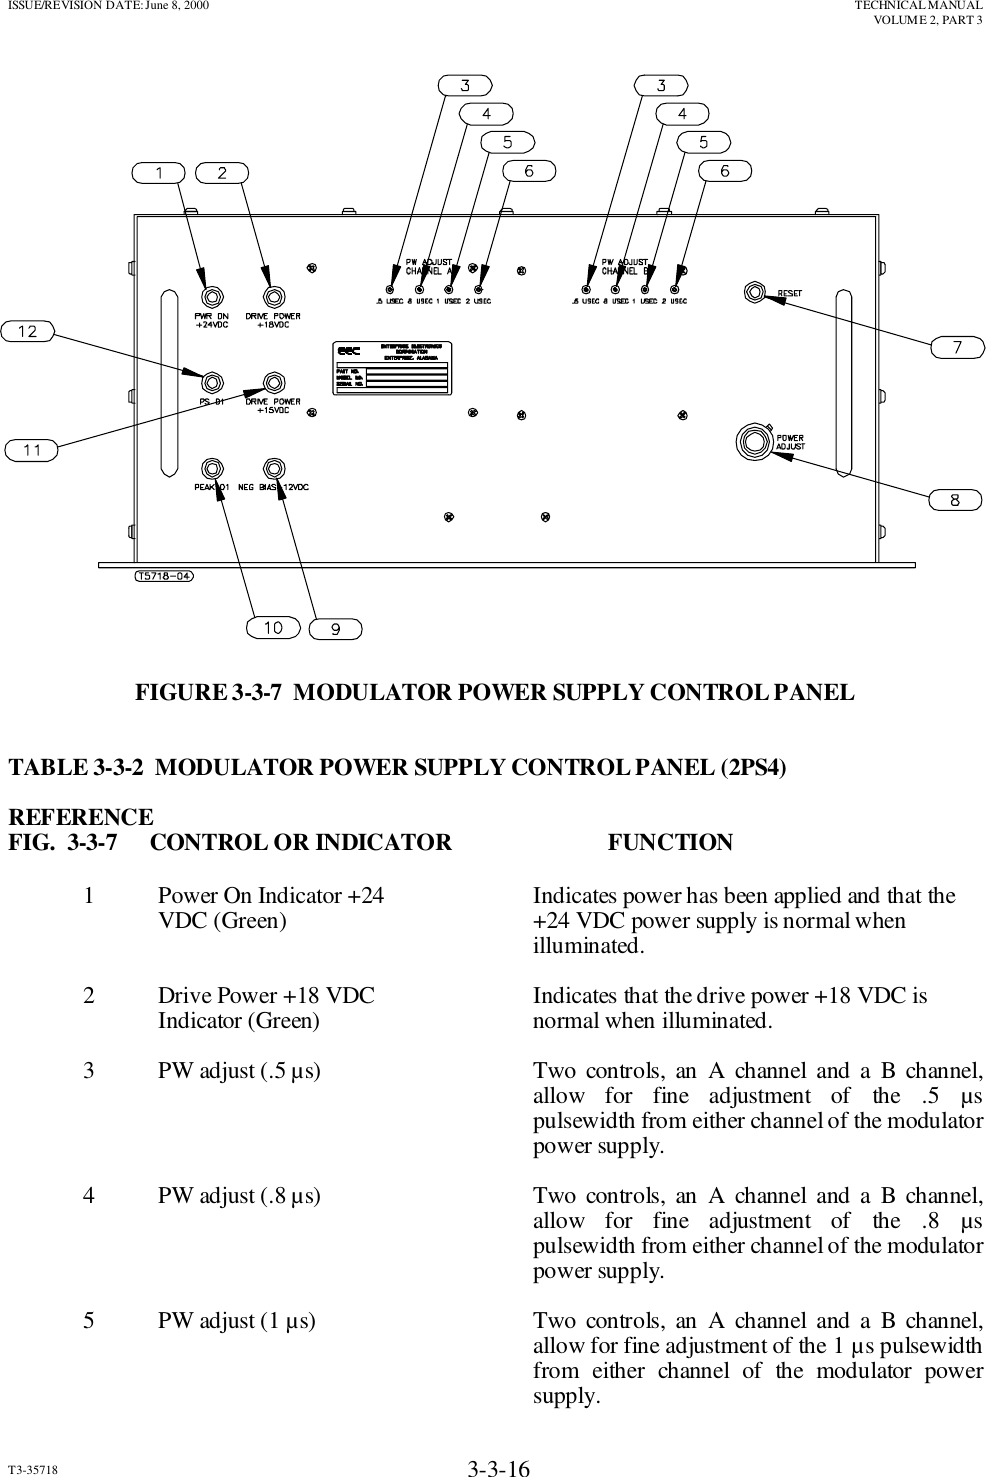 ISSUE/REVISION DATE: June 8, 2000 TECHNICAL MANUALVOLUME 2, PART 3T3-35718 3-3-16FIGURE 3-3-7  MODULATOR POWER SUPPLY CONTROL PANELTABLE 3-3-2  MODULATOR POWER SUPPLY CONTROL PANEL (2PS4)REFERENCEFIG.  3-3-7     CONTROL OR INDICATOR FUNCTION1 Power On Indicator +24  Indicates power has been applied and that theVDC (Green) +24 VDC power supply is normal whenilluminated.2 Drive Power +18 VDC Indicates that the drive power +18 VDC isIndicator (Green) normal when illuminated.3 PW adjust (.5 µs) Two controls, an A channel and a B channel,allow for fine adjustment of the .5 µspulsewidth from either channel of the modulatorpower supply.4 PW adjust (.8 µs) Two controls, an A channel and a B channel,allow for fine adjustment of the .8 µspulsewidth from either channel of the modulatorpower supply.5 PW adjust (1 µs) Two controls, an A channel and a B channel,allow for fine adjustment of the 1 µs pulsewidthfrom either channel of the modulator powersupply.